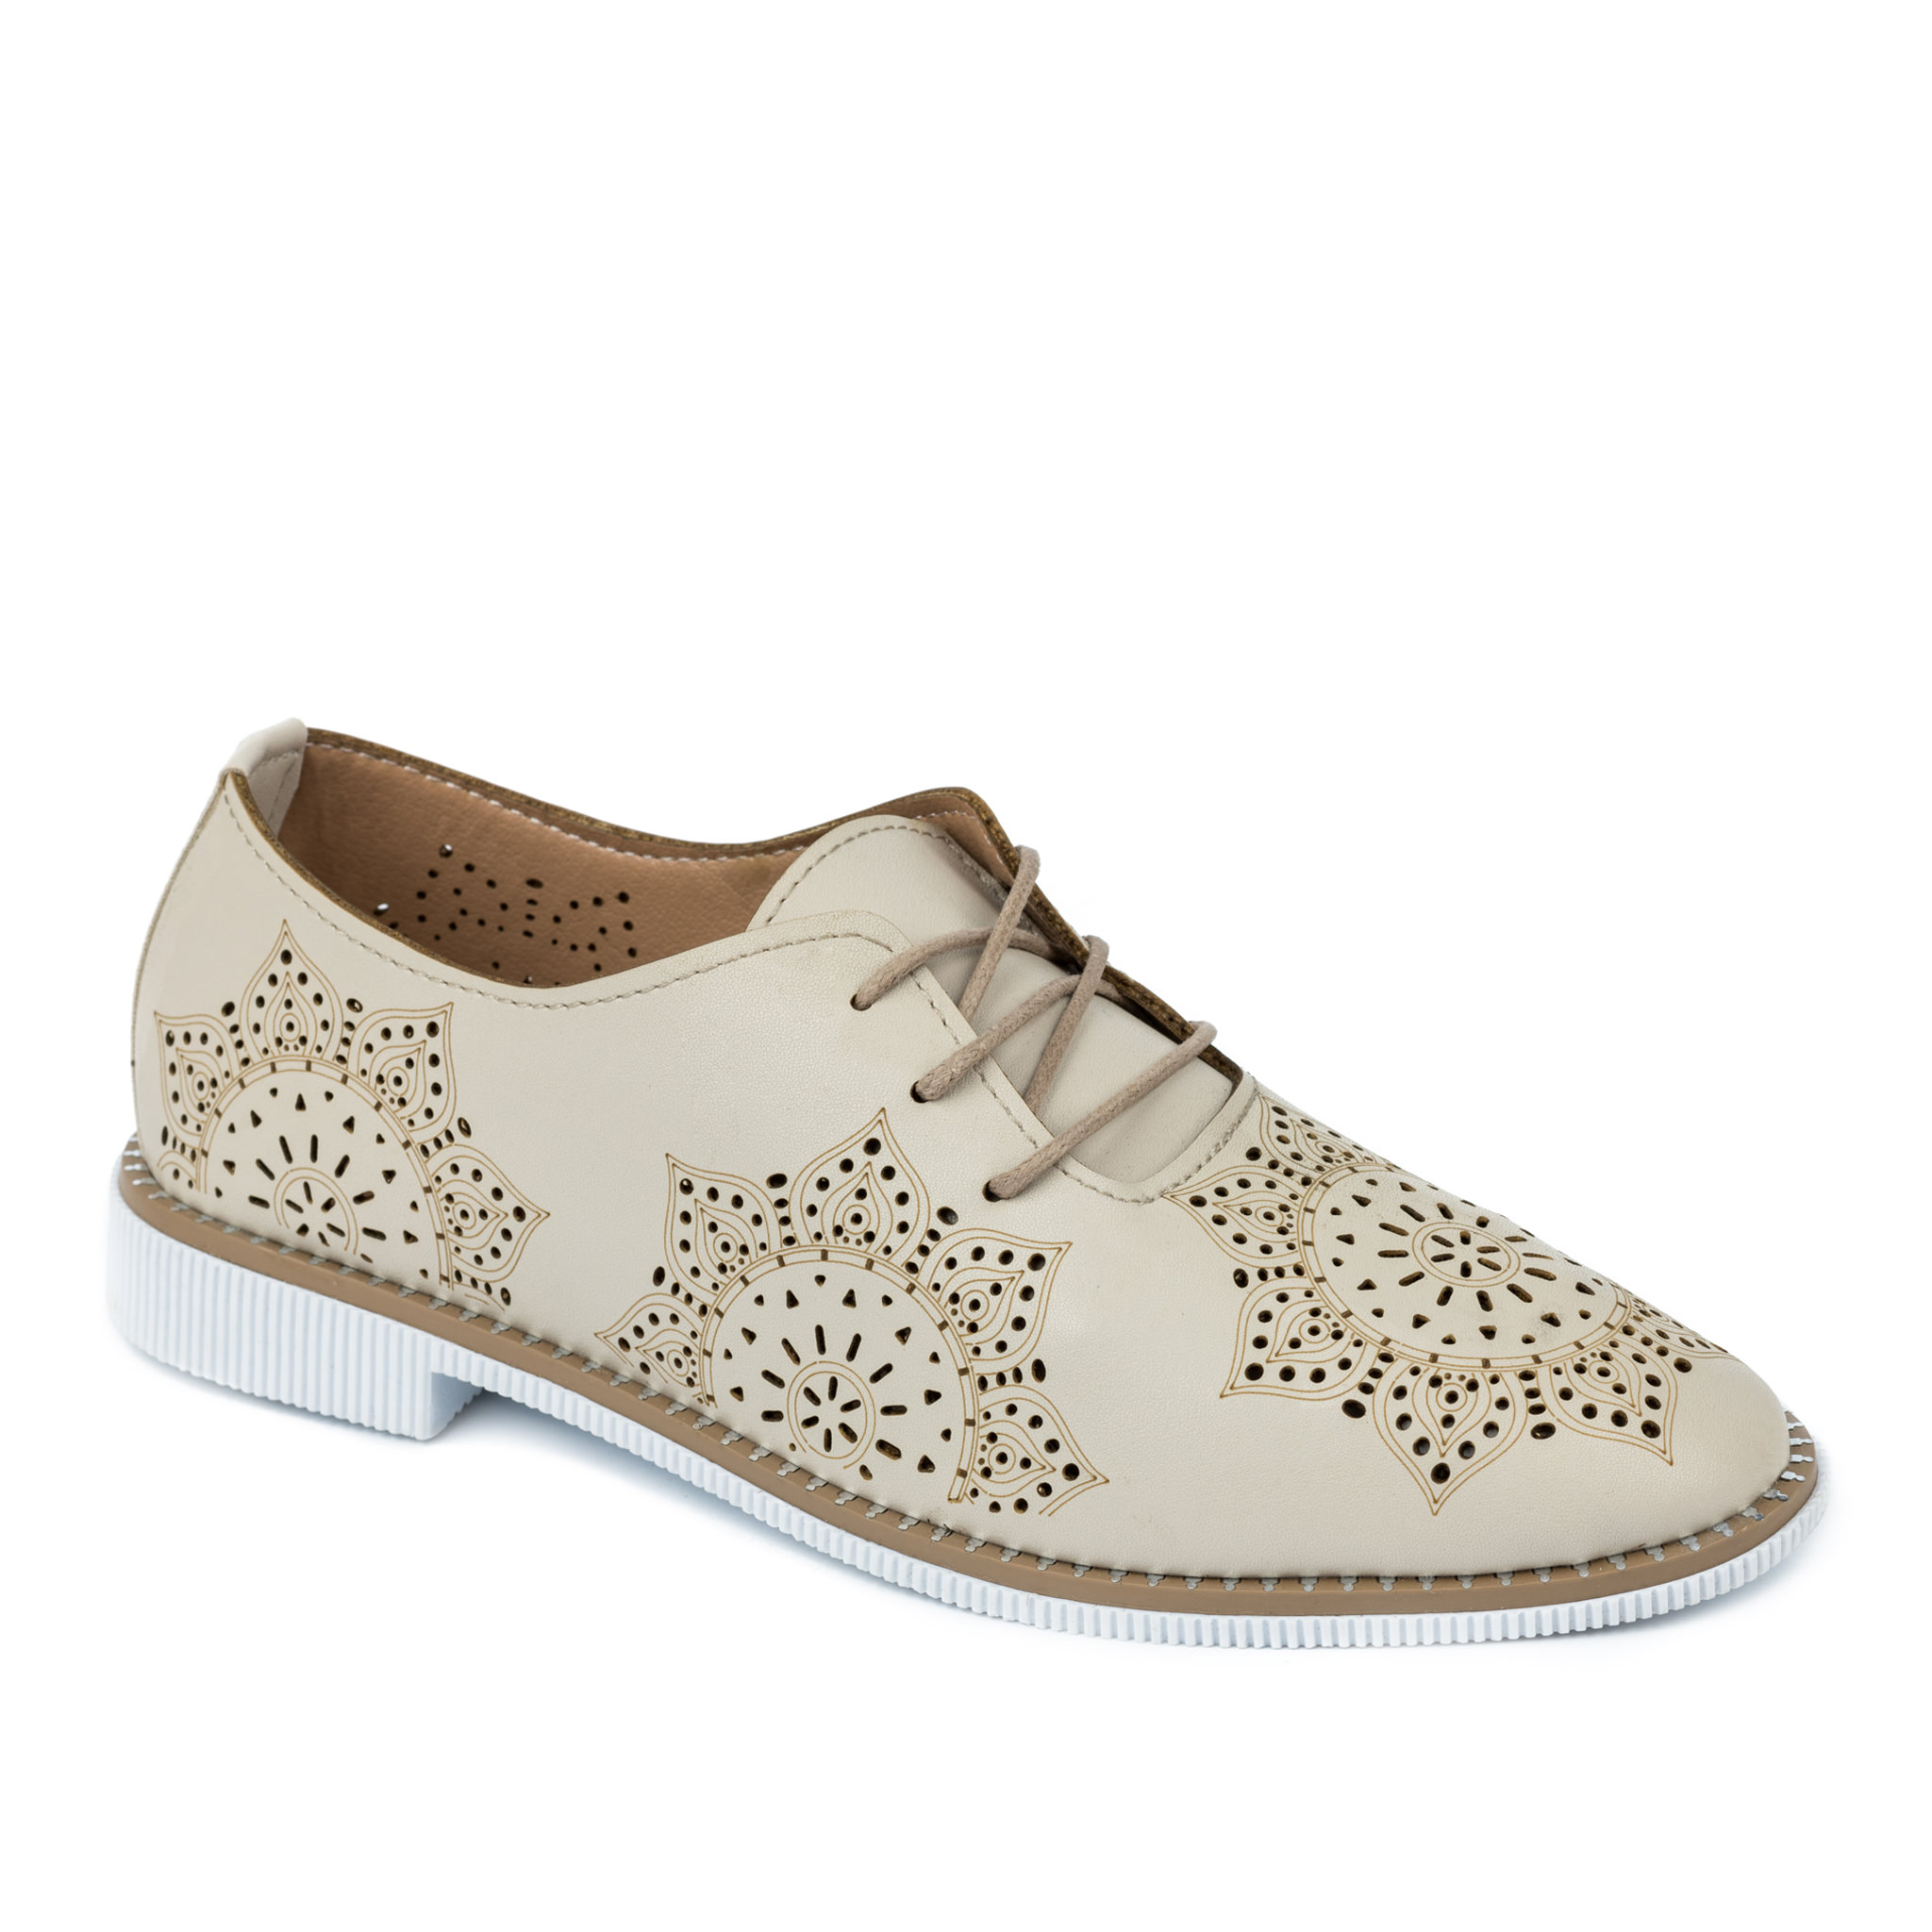 HOLLOW OXFORD SHOES - BEIGE